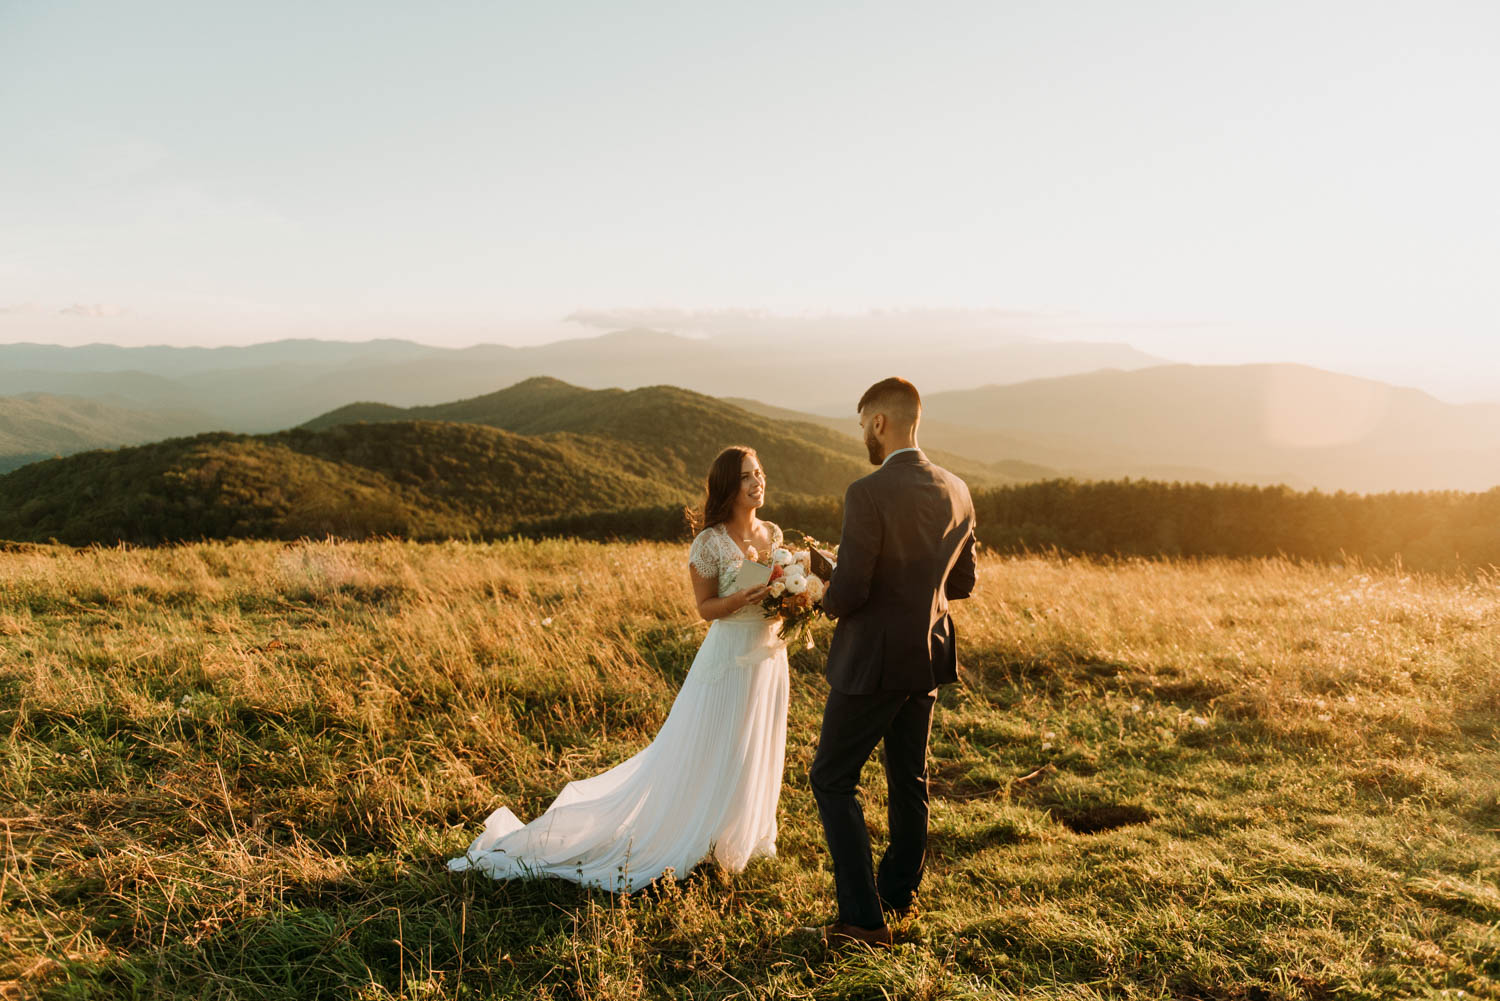 a couple says their vows overlooking a beautiful sun setting over the mountain peaks in the distance in Asheville, one of the best places to elope in North Carolina